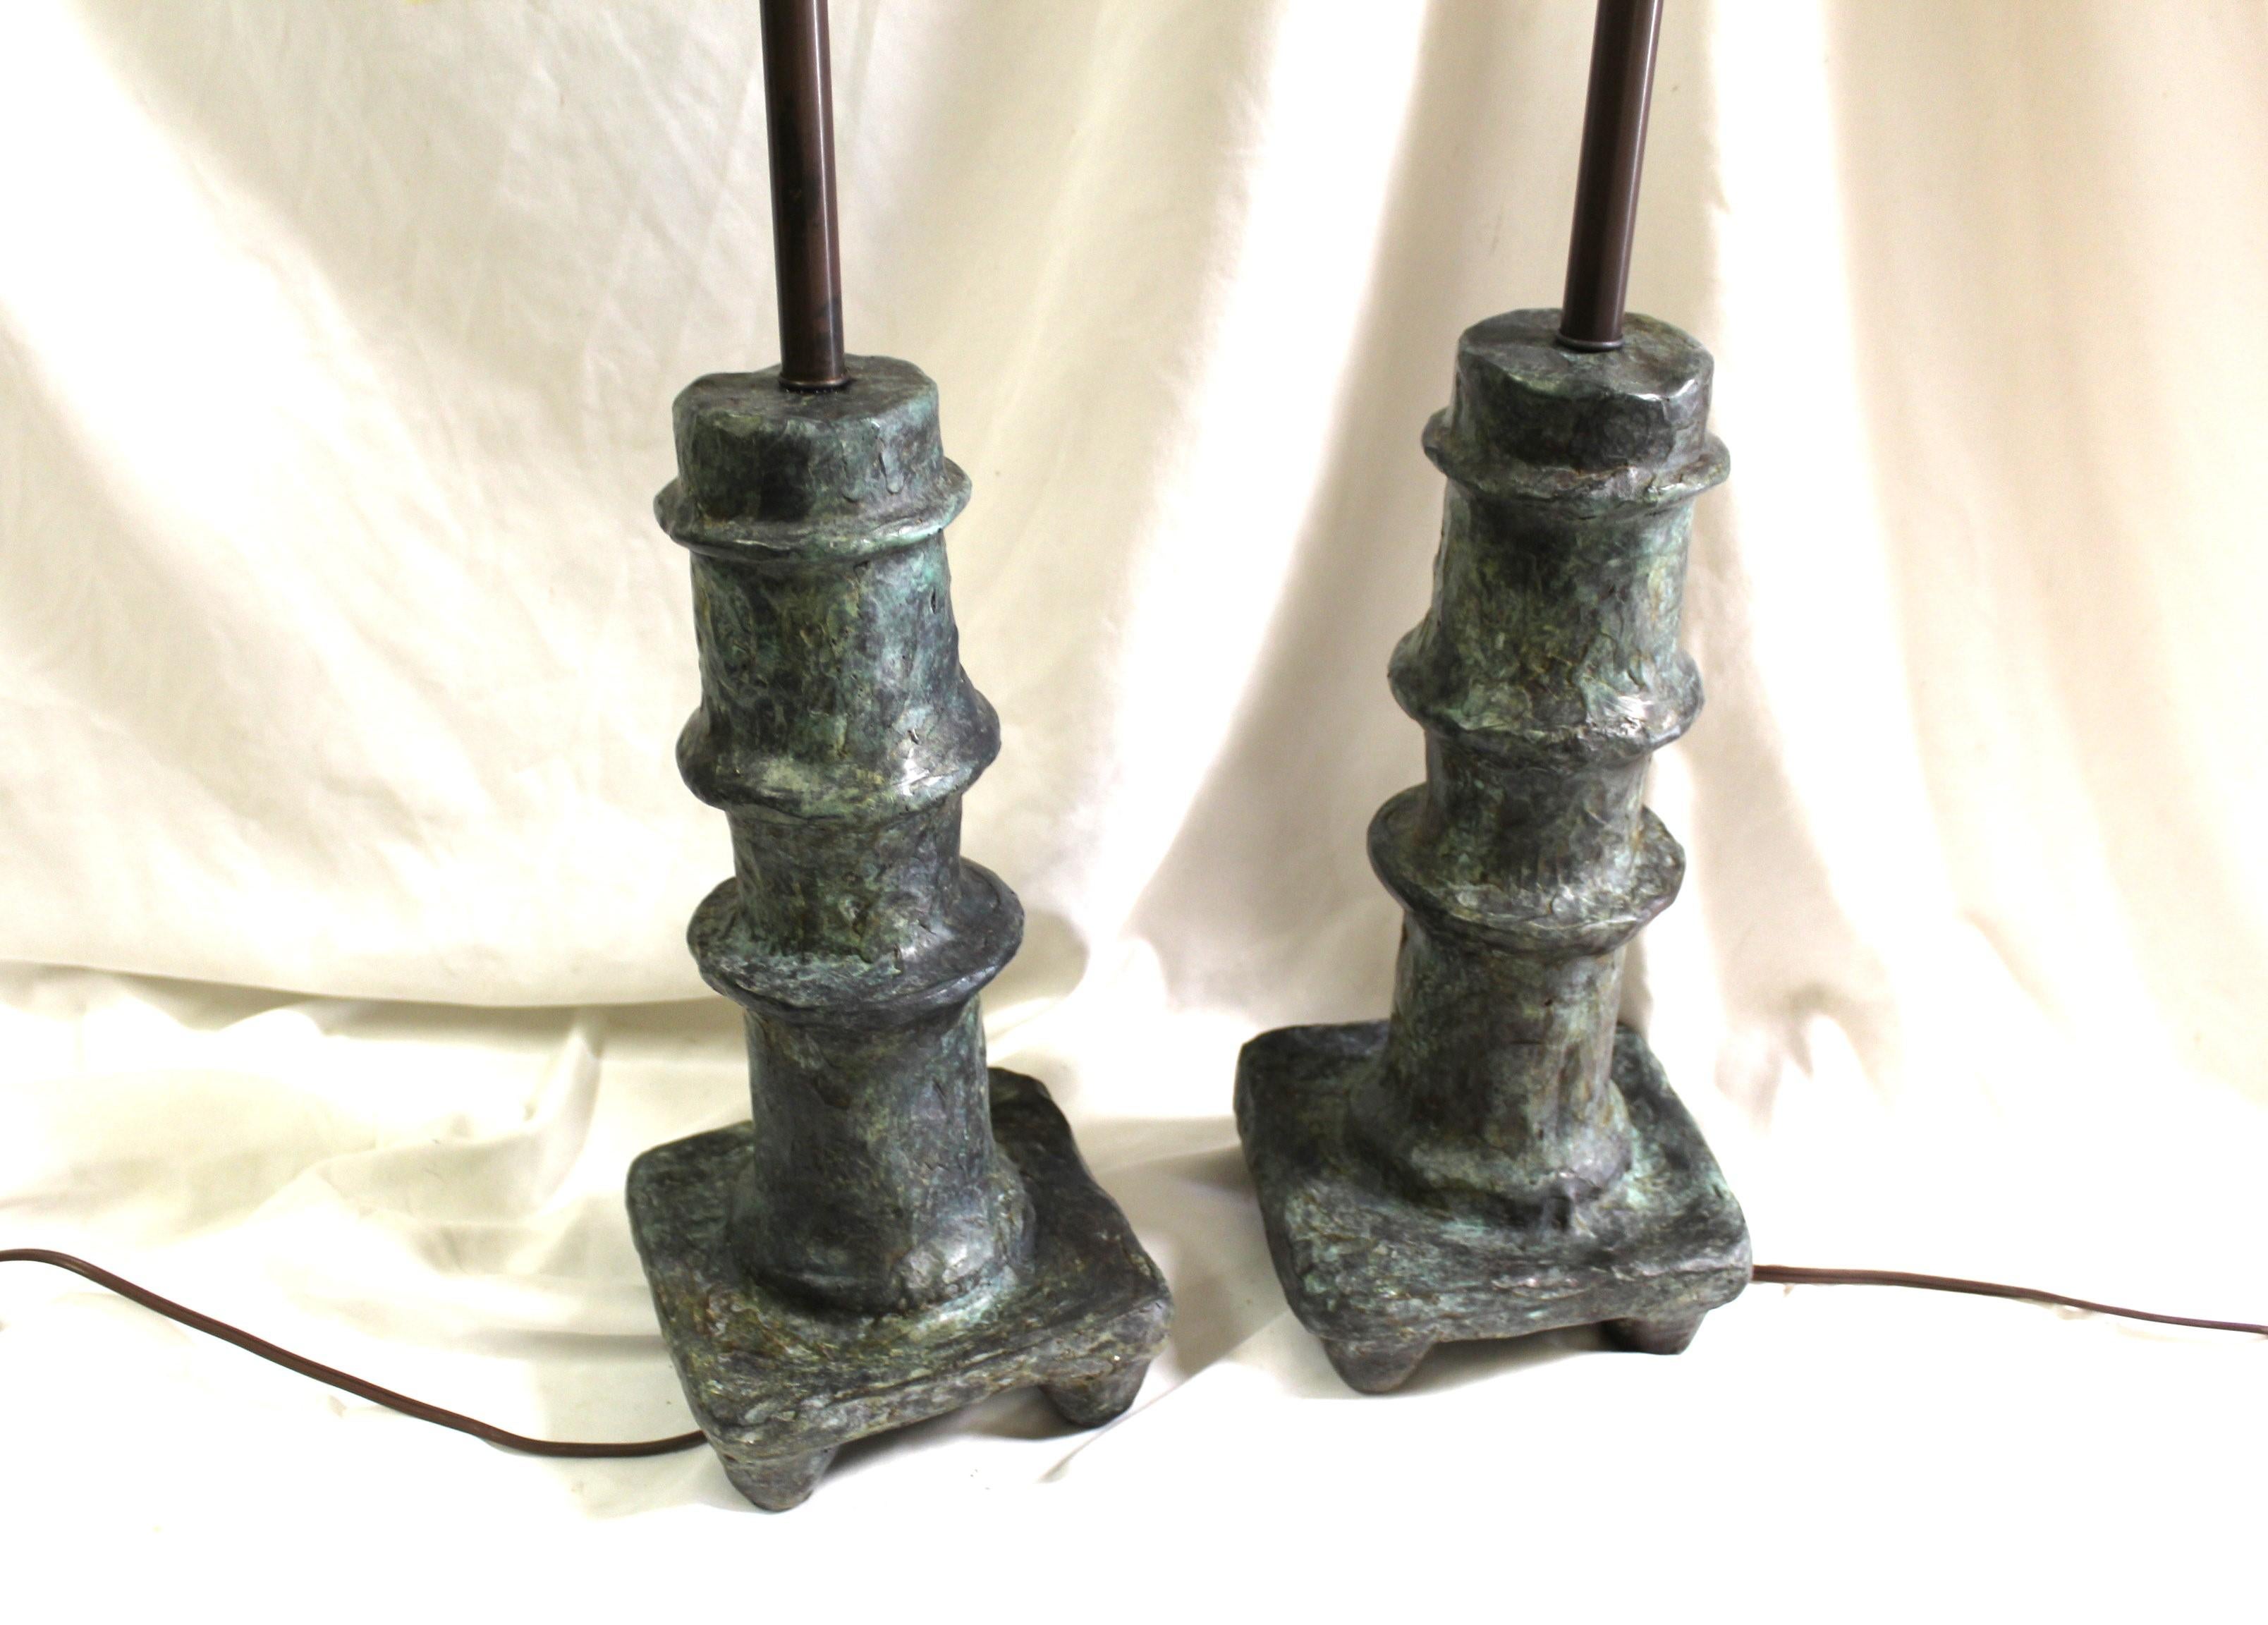 A heavy bronze casting in the Art Nouveau style after the designs by Giacometti from the 40,s . The typical look and texture of the bronze .Has the multi-patina finish in green,s and Brown . A very well made casting .They are good looking Lamps in